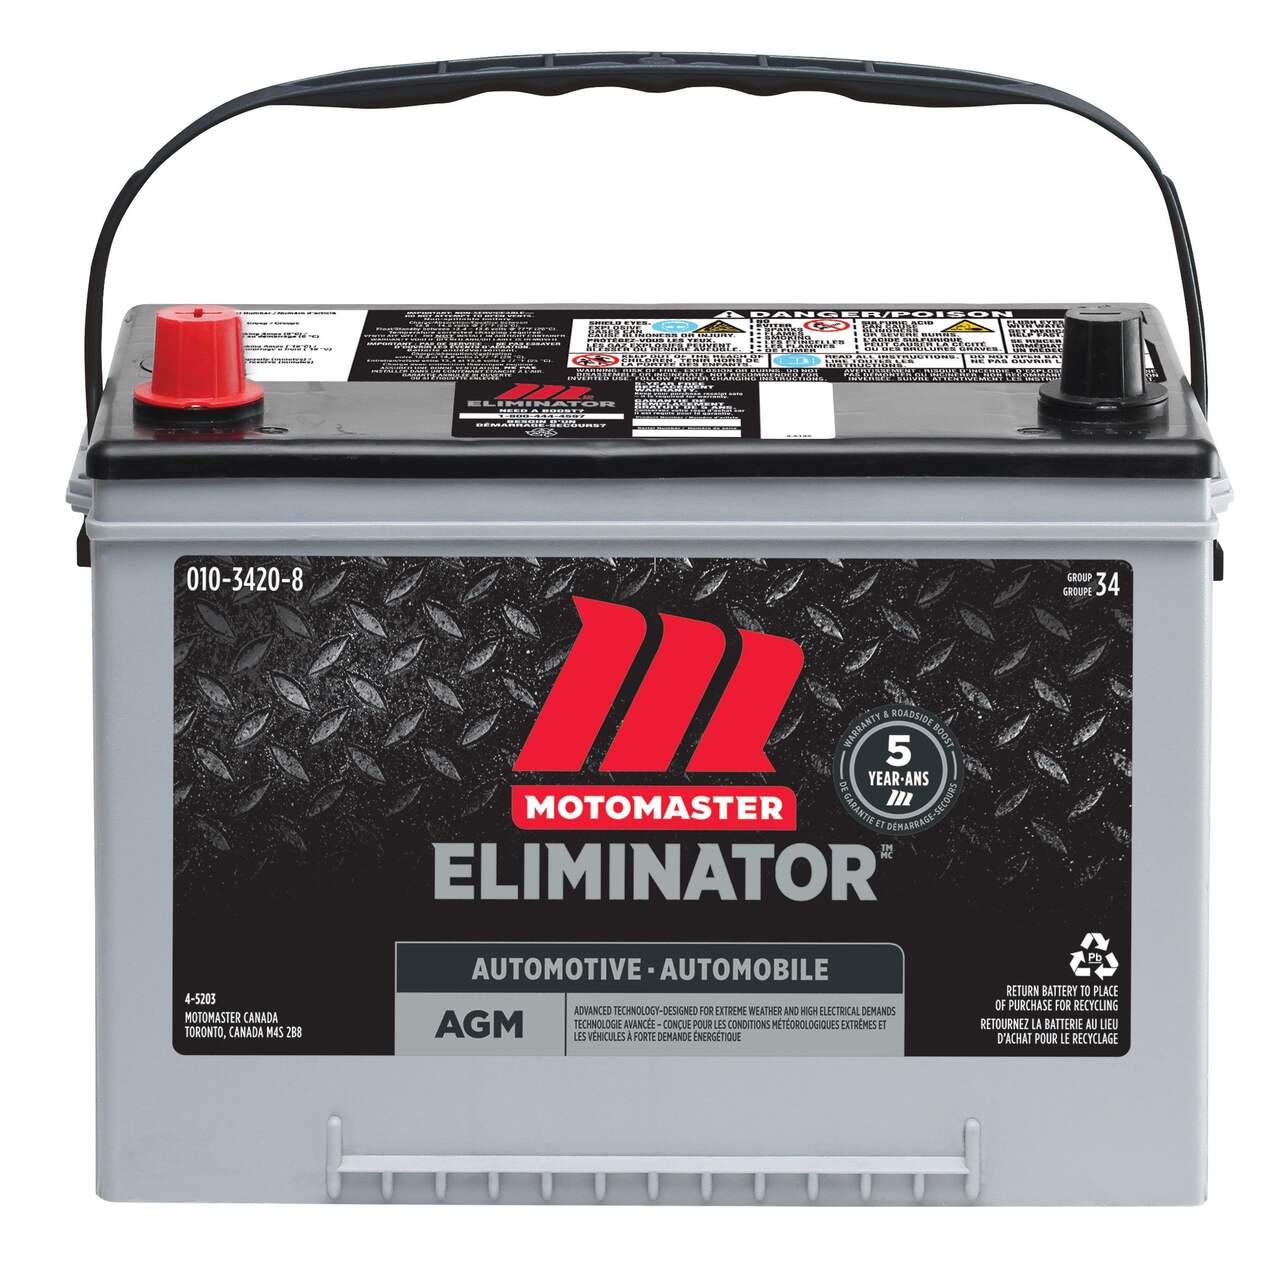 https://media-www.canadiantire.ca/product/automotive/light-auto-parts/auto-batteries/0103420/motomaster-eliminator-agm-group-size-34-battery-750-cca-cf95caad-72b0-4b77-bf04-368f242a6825-jpgrendition.jpg?imdensity=1&imwidth=640&impolicy=mZoom